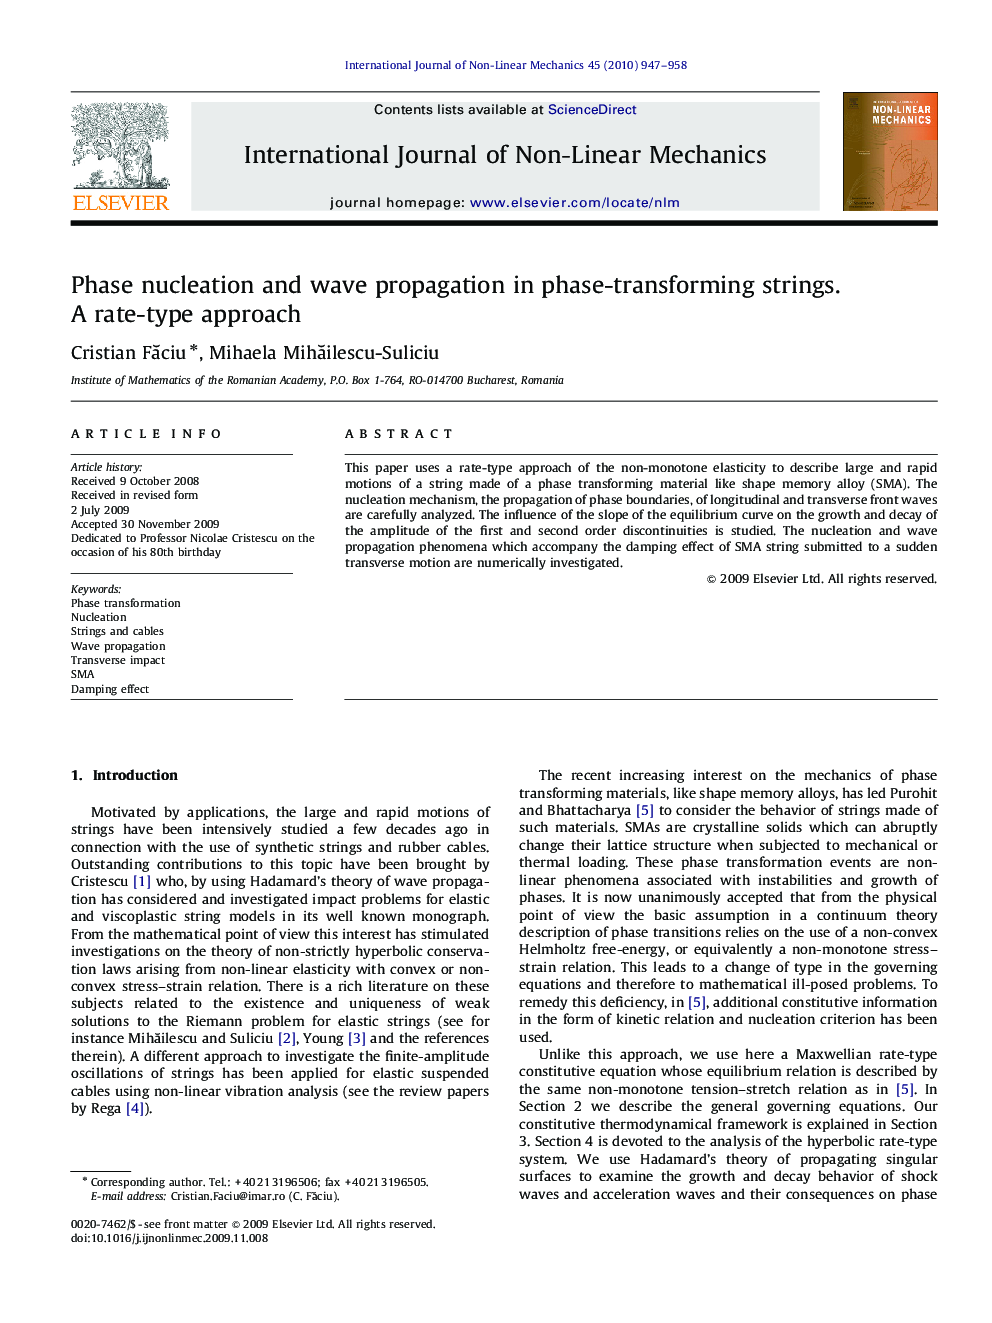 Phase nucleation and wave propagation in phase-transforming strings. A rate-type approach